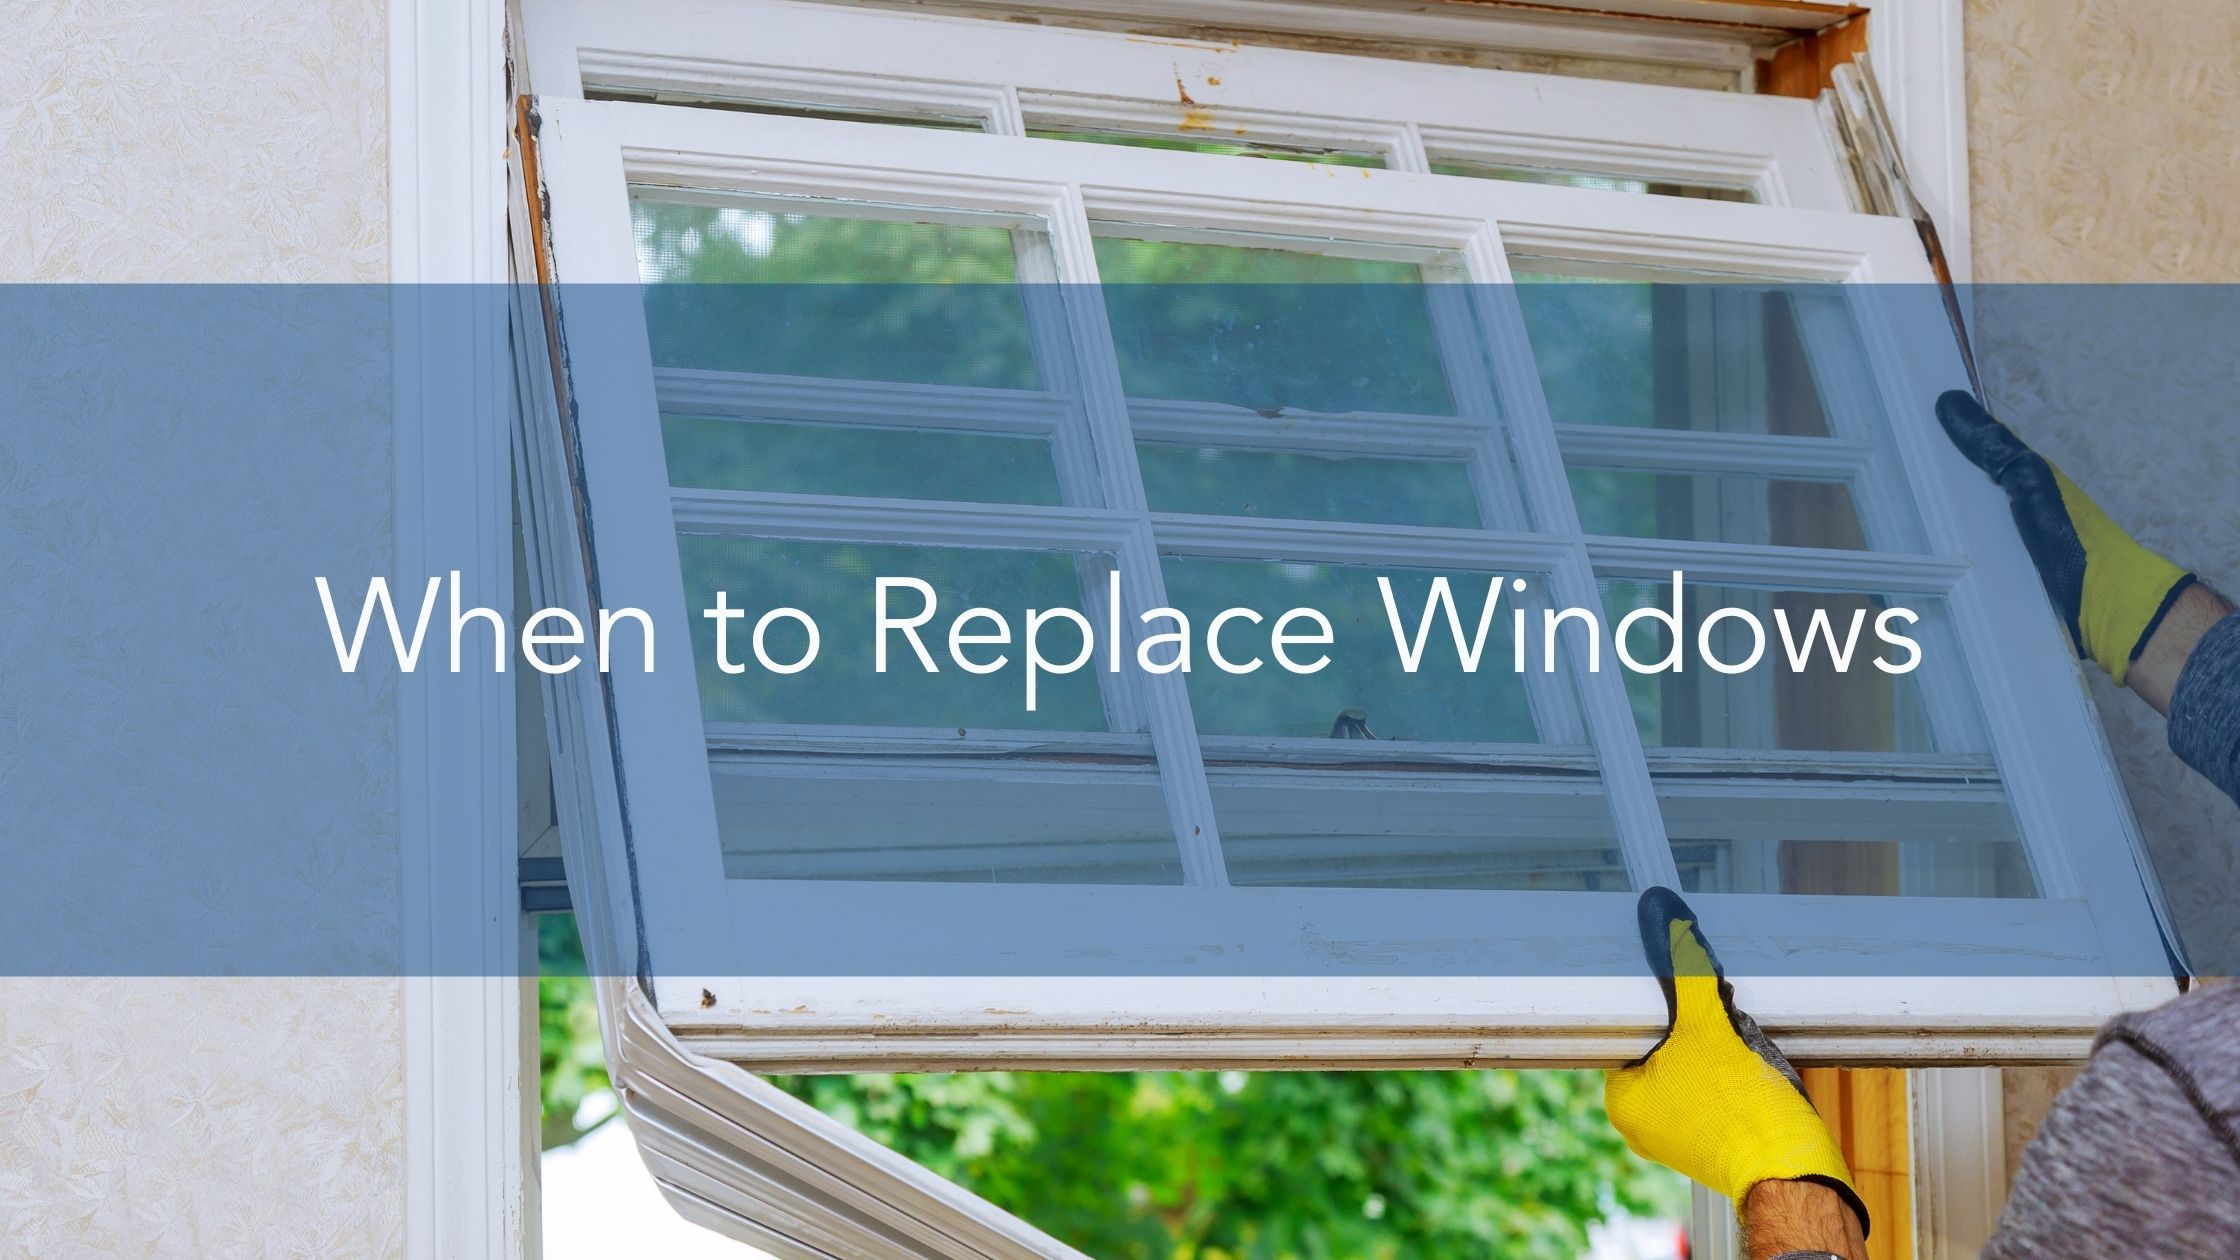 When to Replace Windows